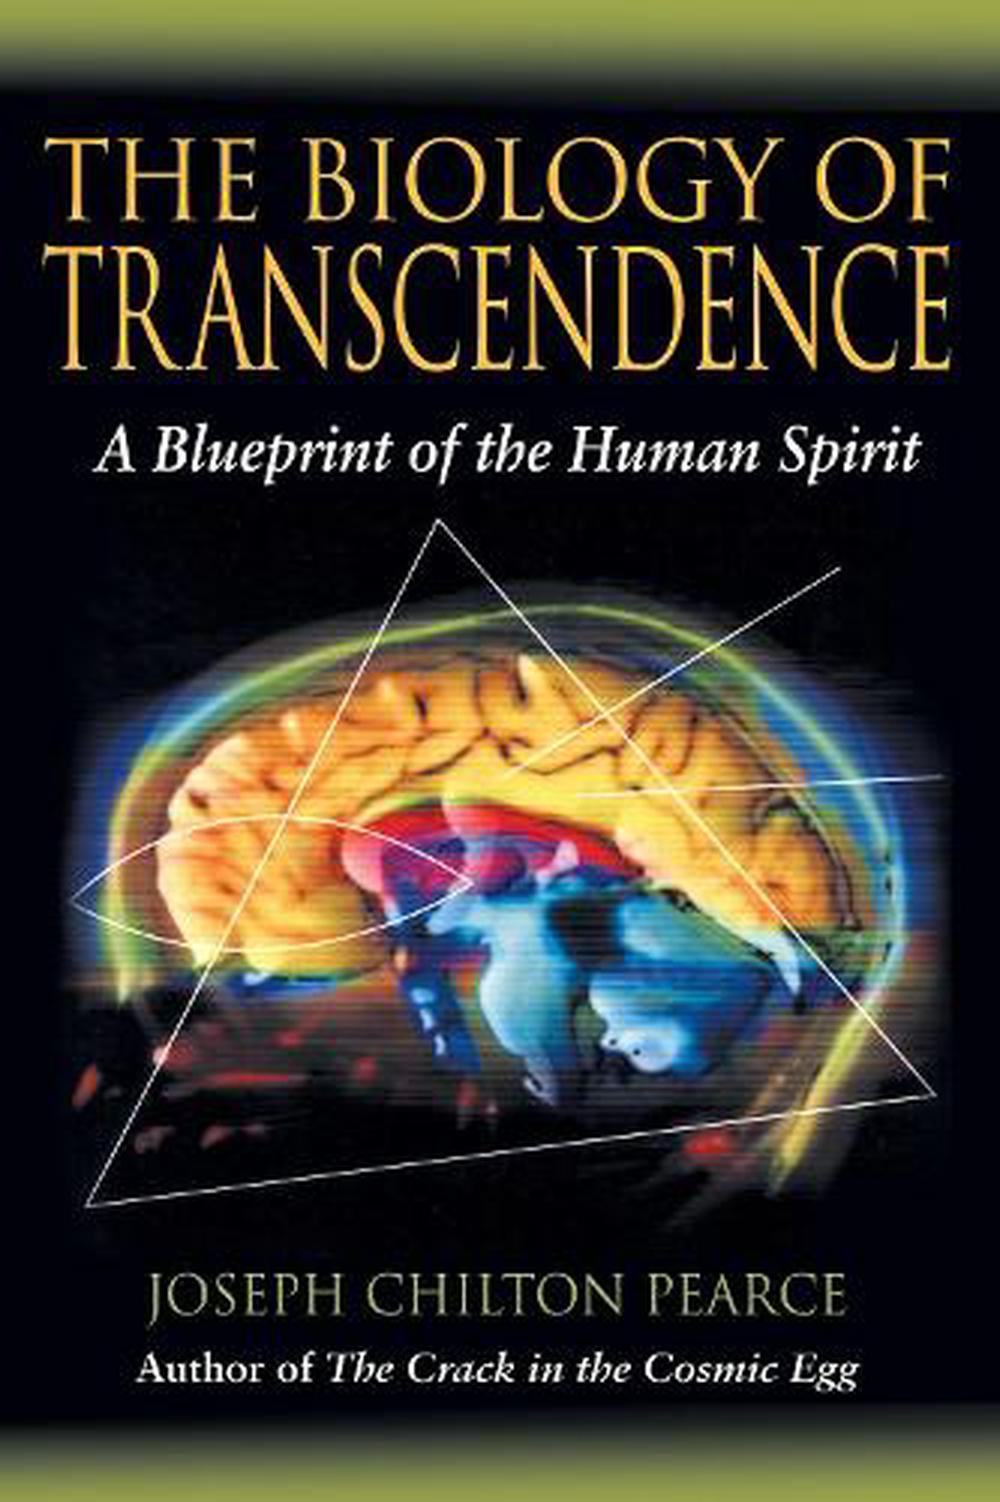 The Biology of Transcendence A Blueprint of the Human Spirit by Joseph